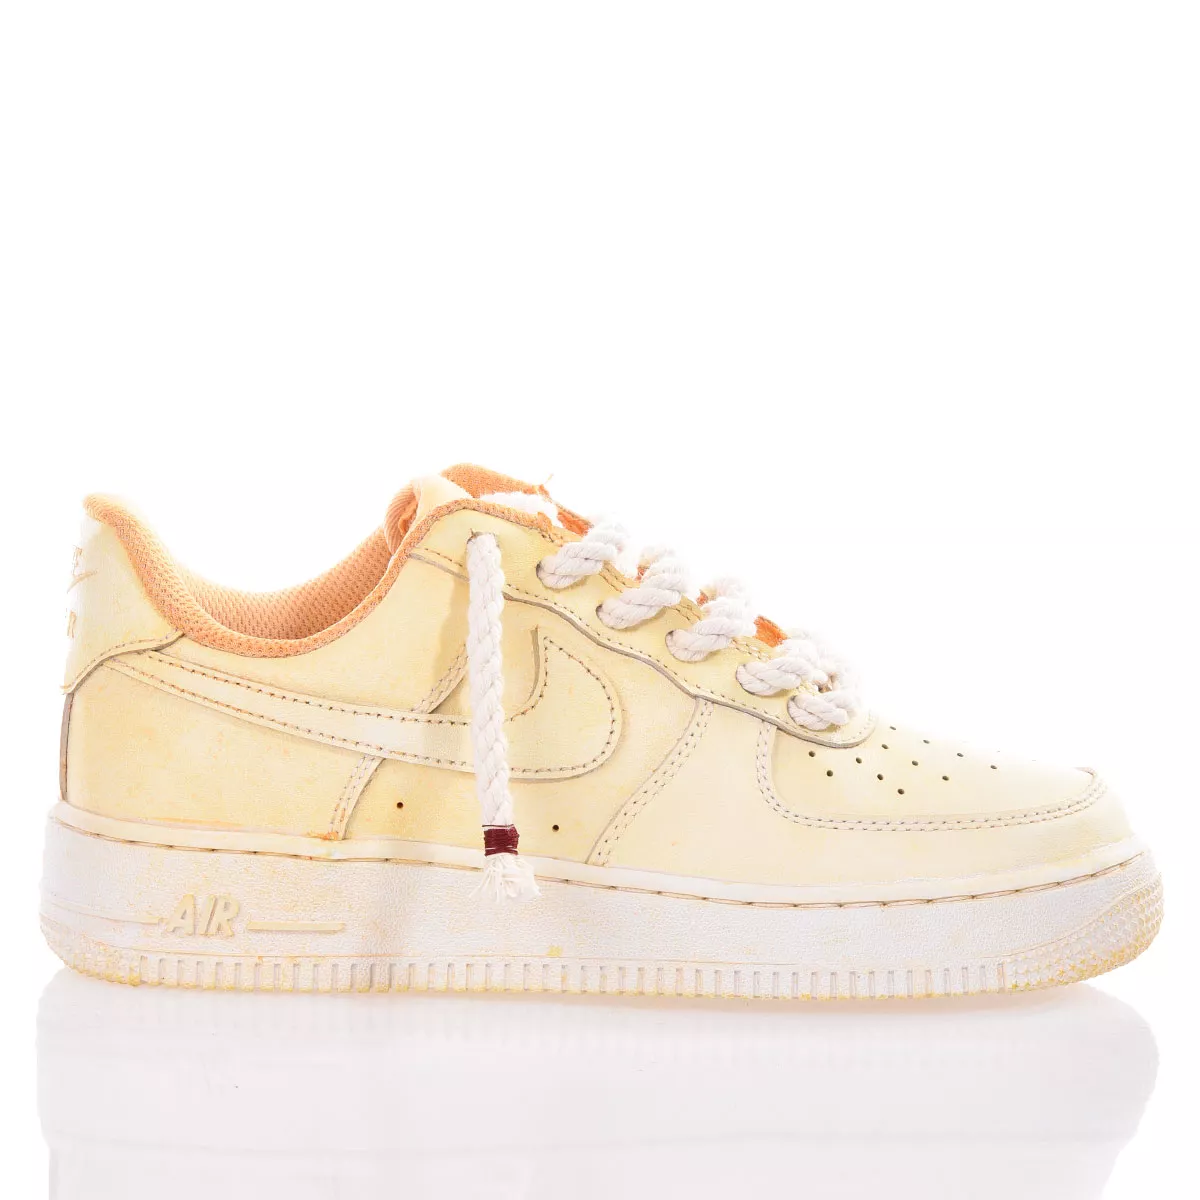 Nike Air Force 1 Dye Apricot Air Force 1 Used-Waschung